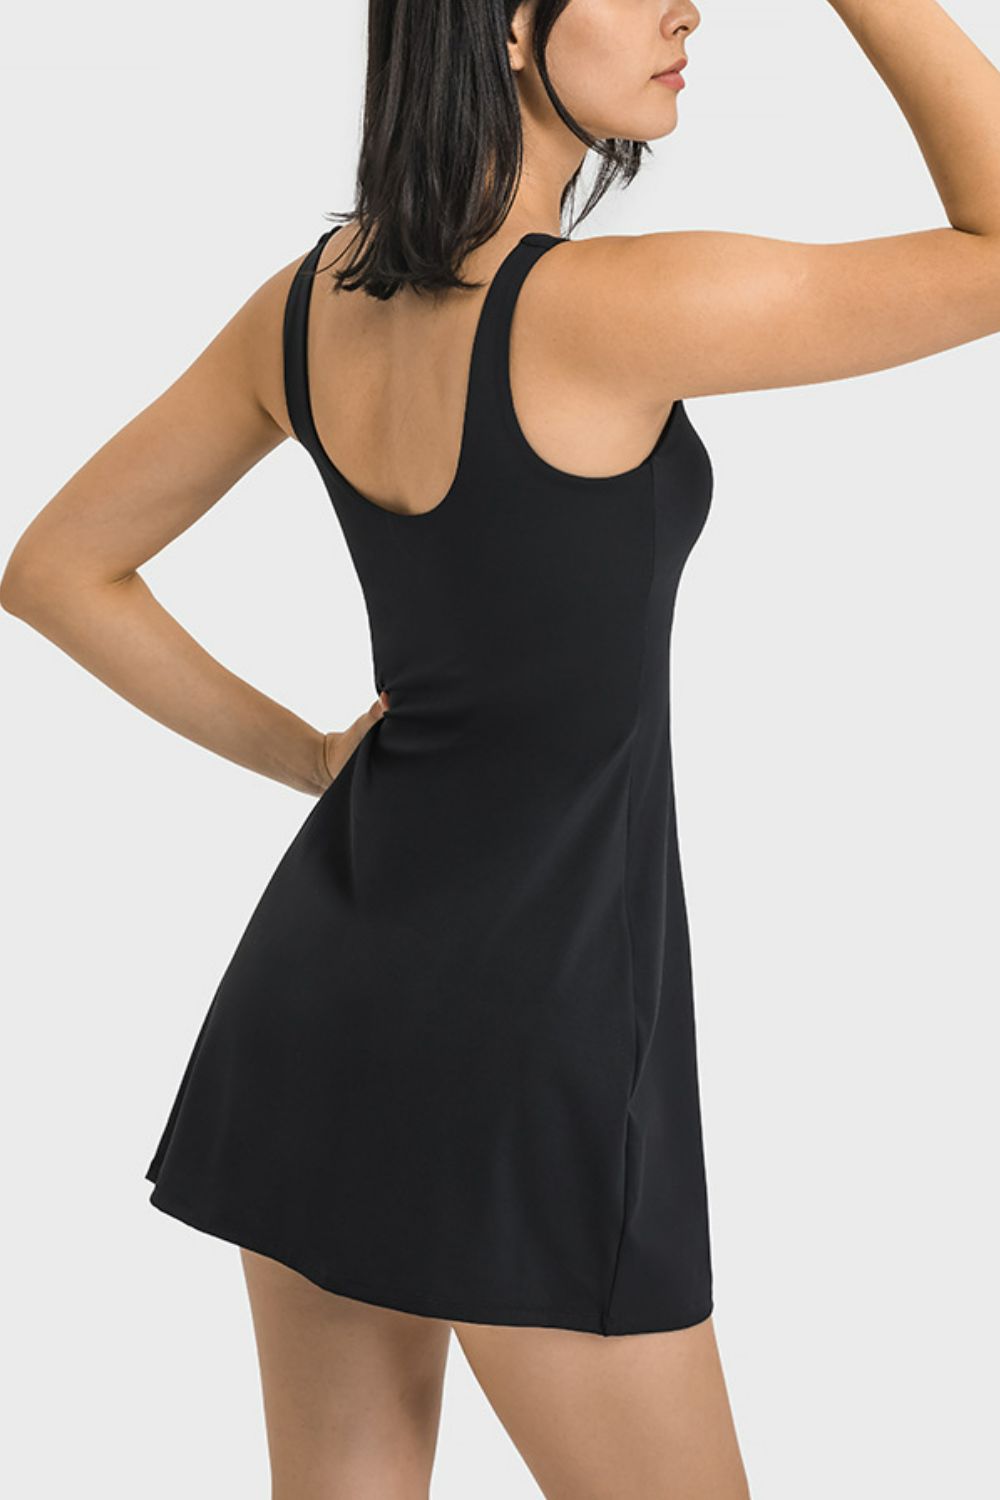 Full Coverage Shortie Bottom One-piece Activewear Athletic Tennis Dress